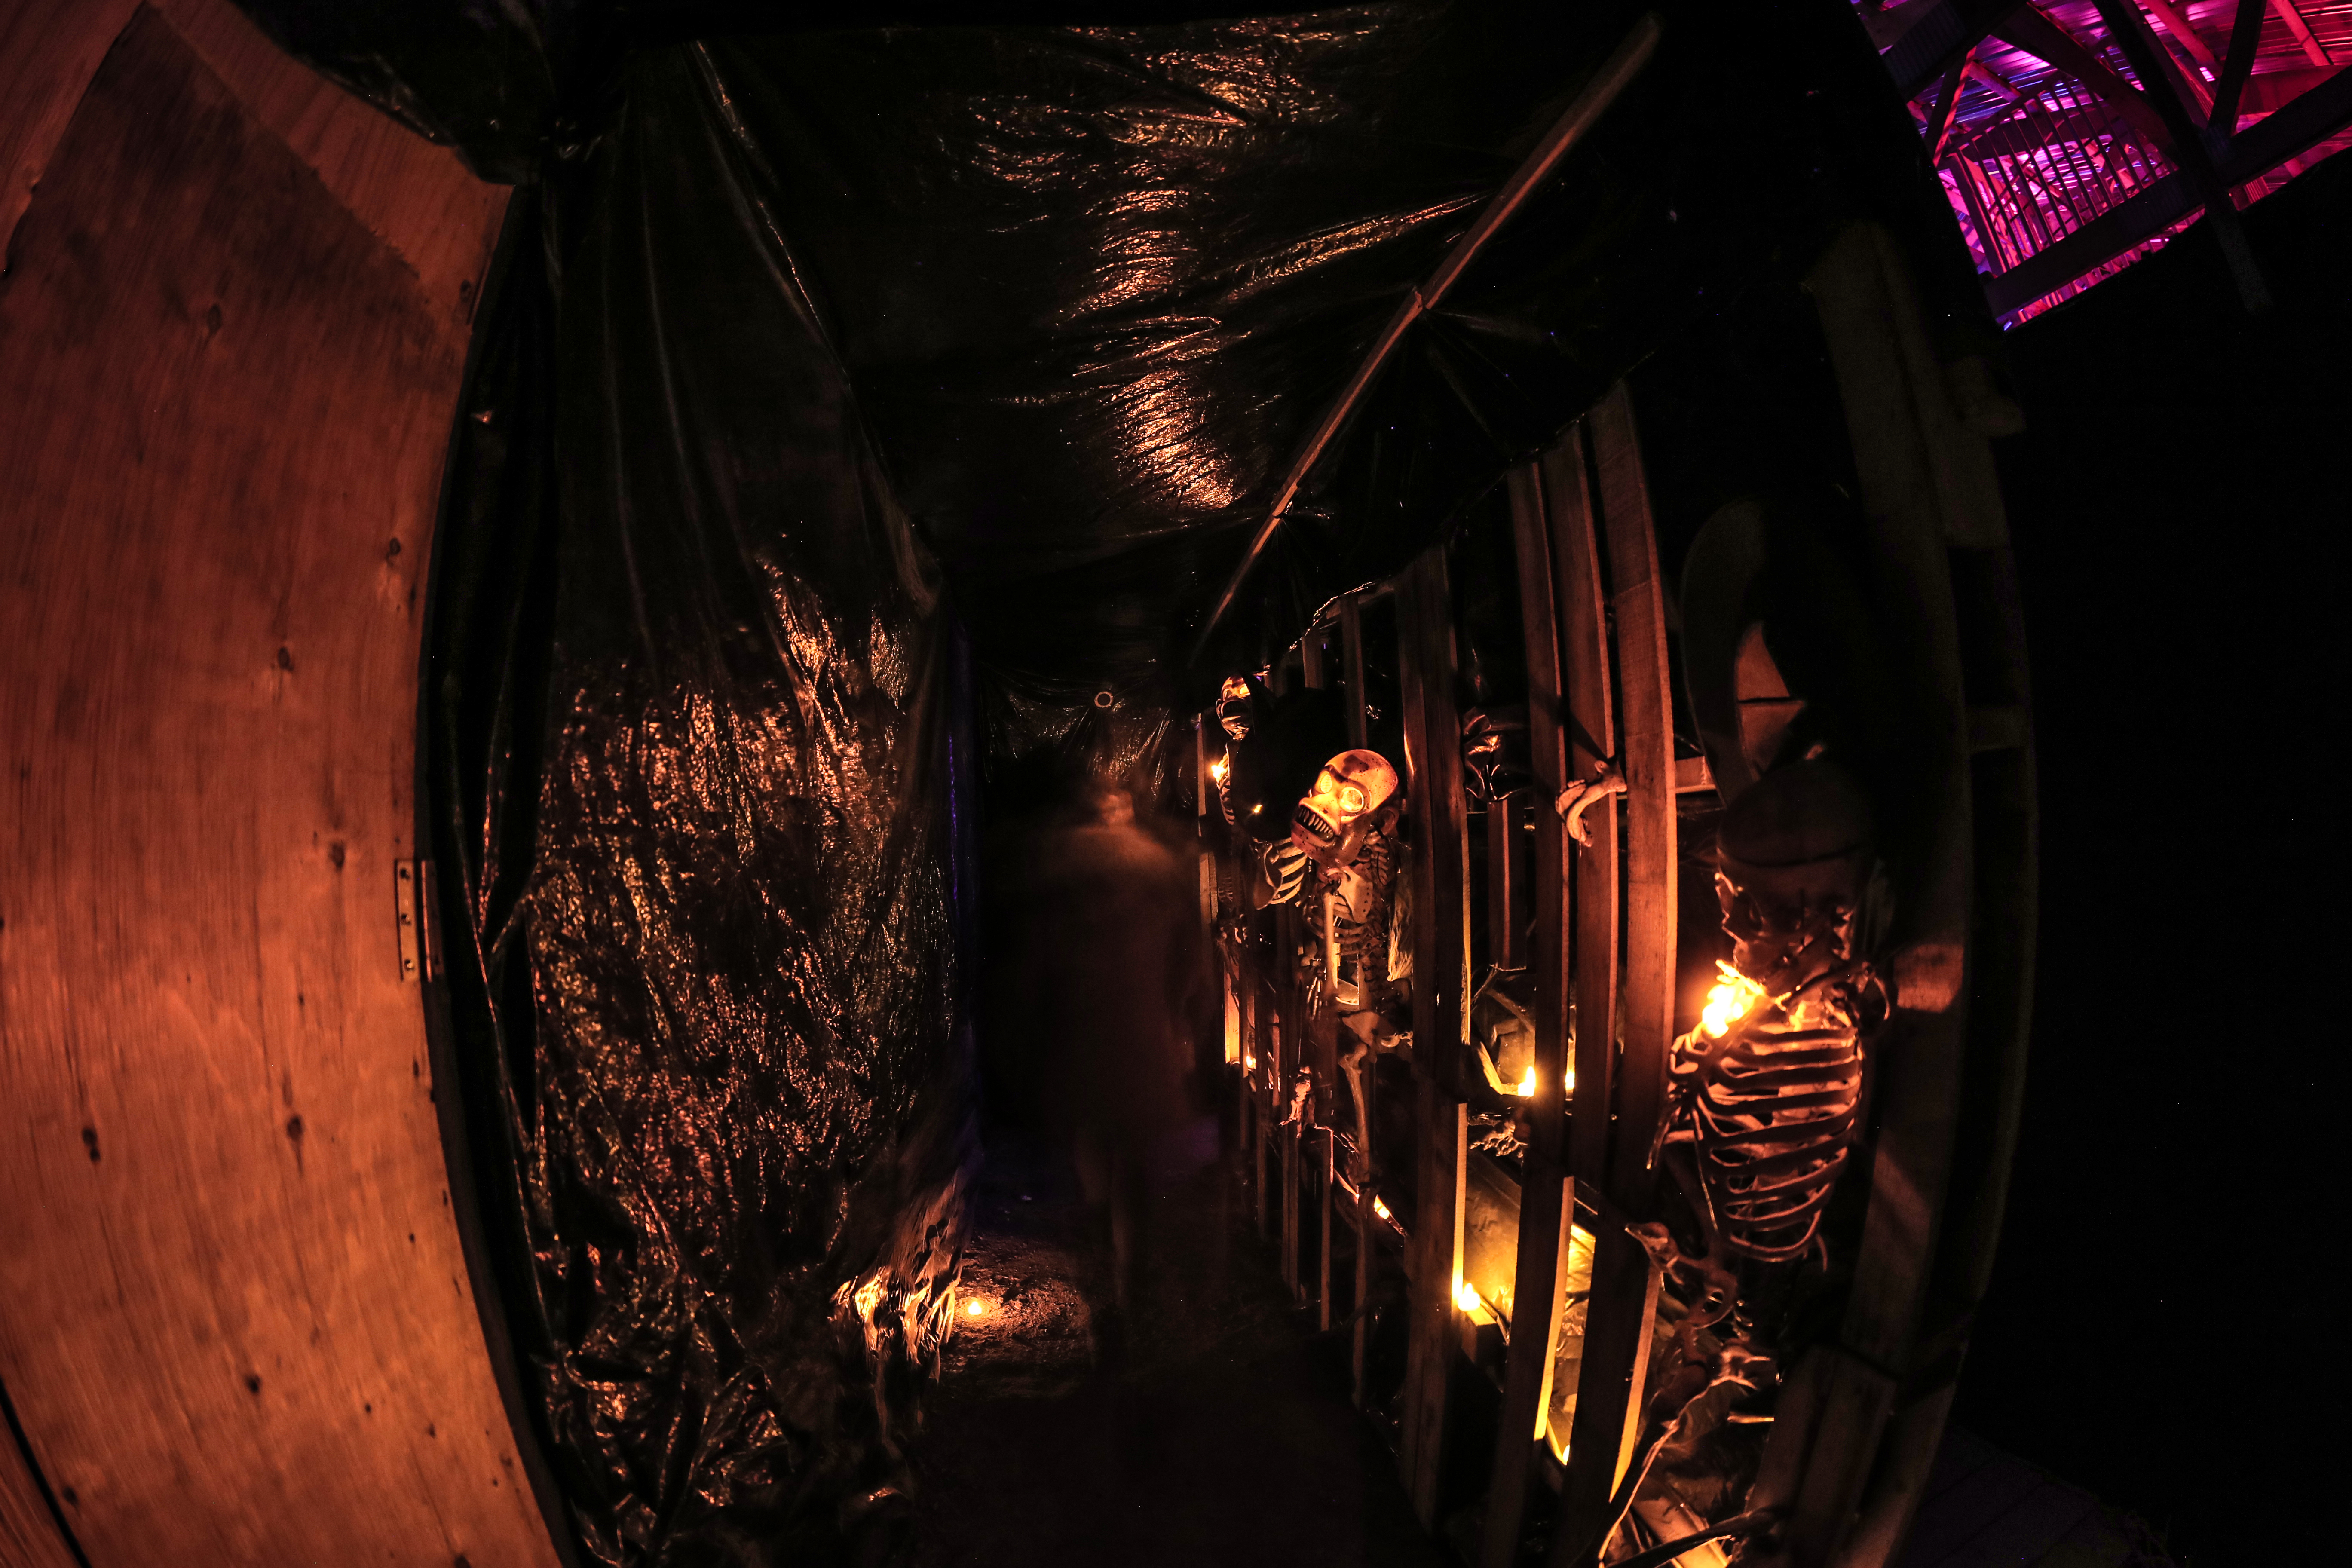 Image of a dark hallway with glowing orange lights and skeletons on the walls.